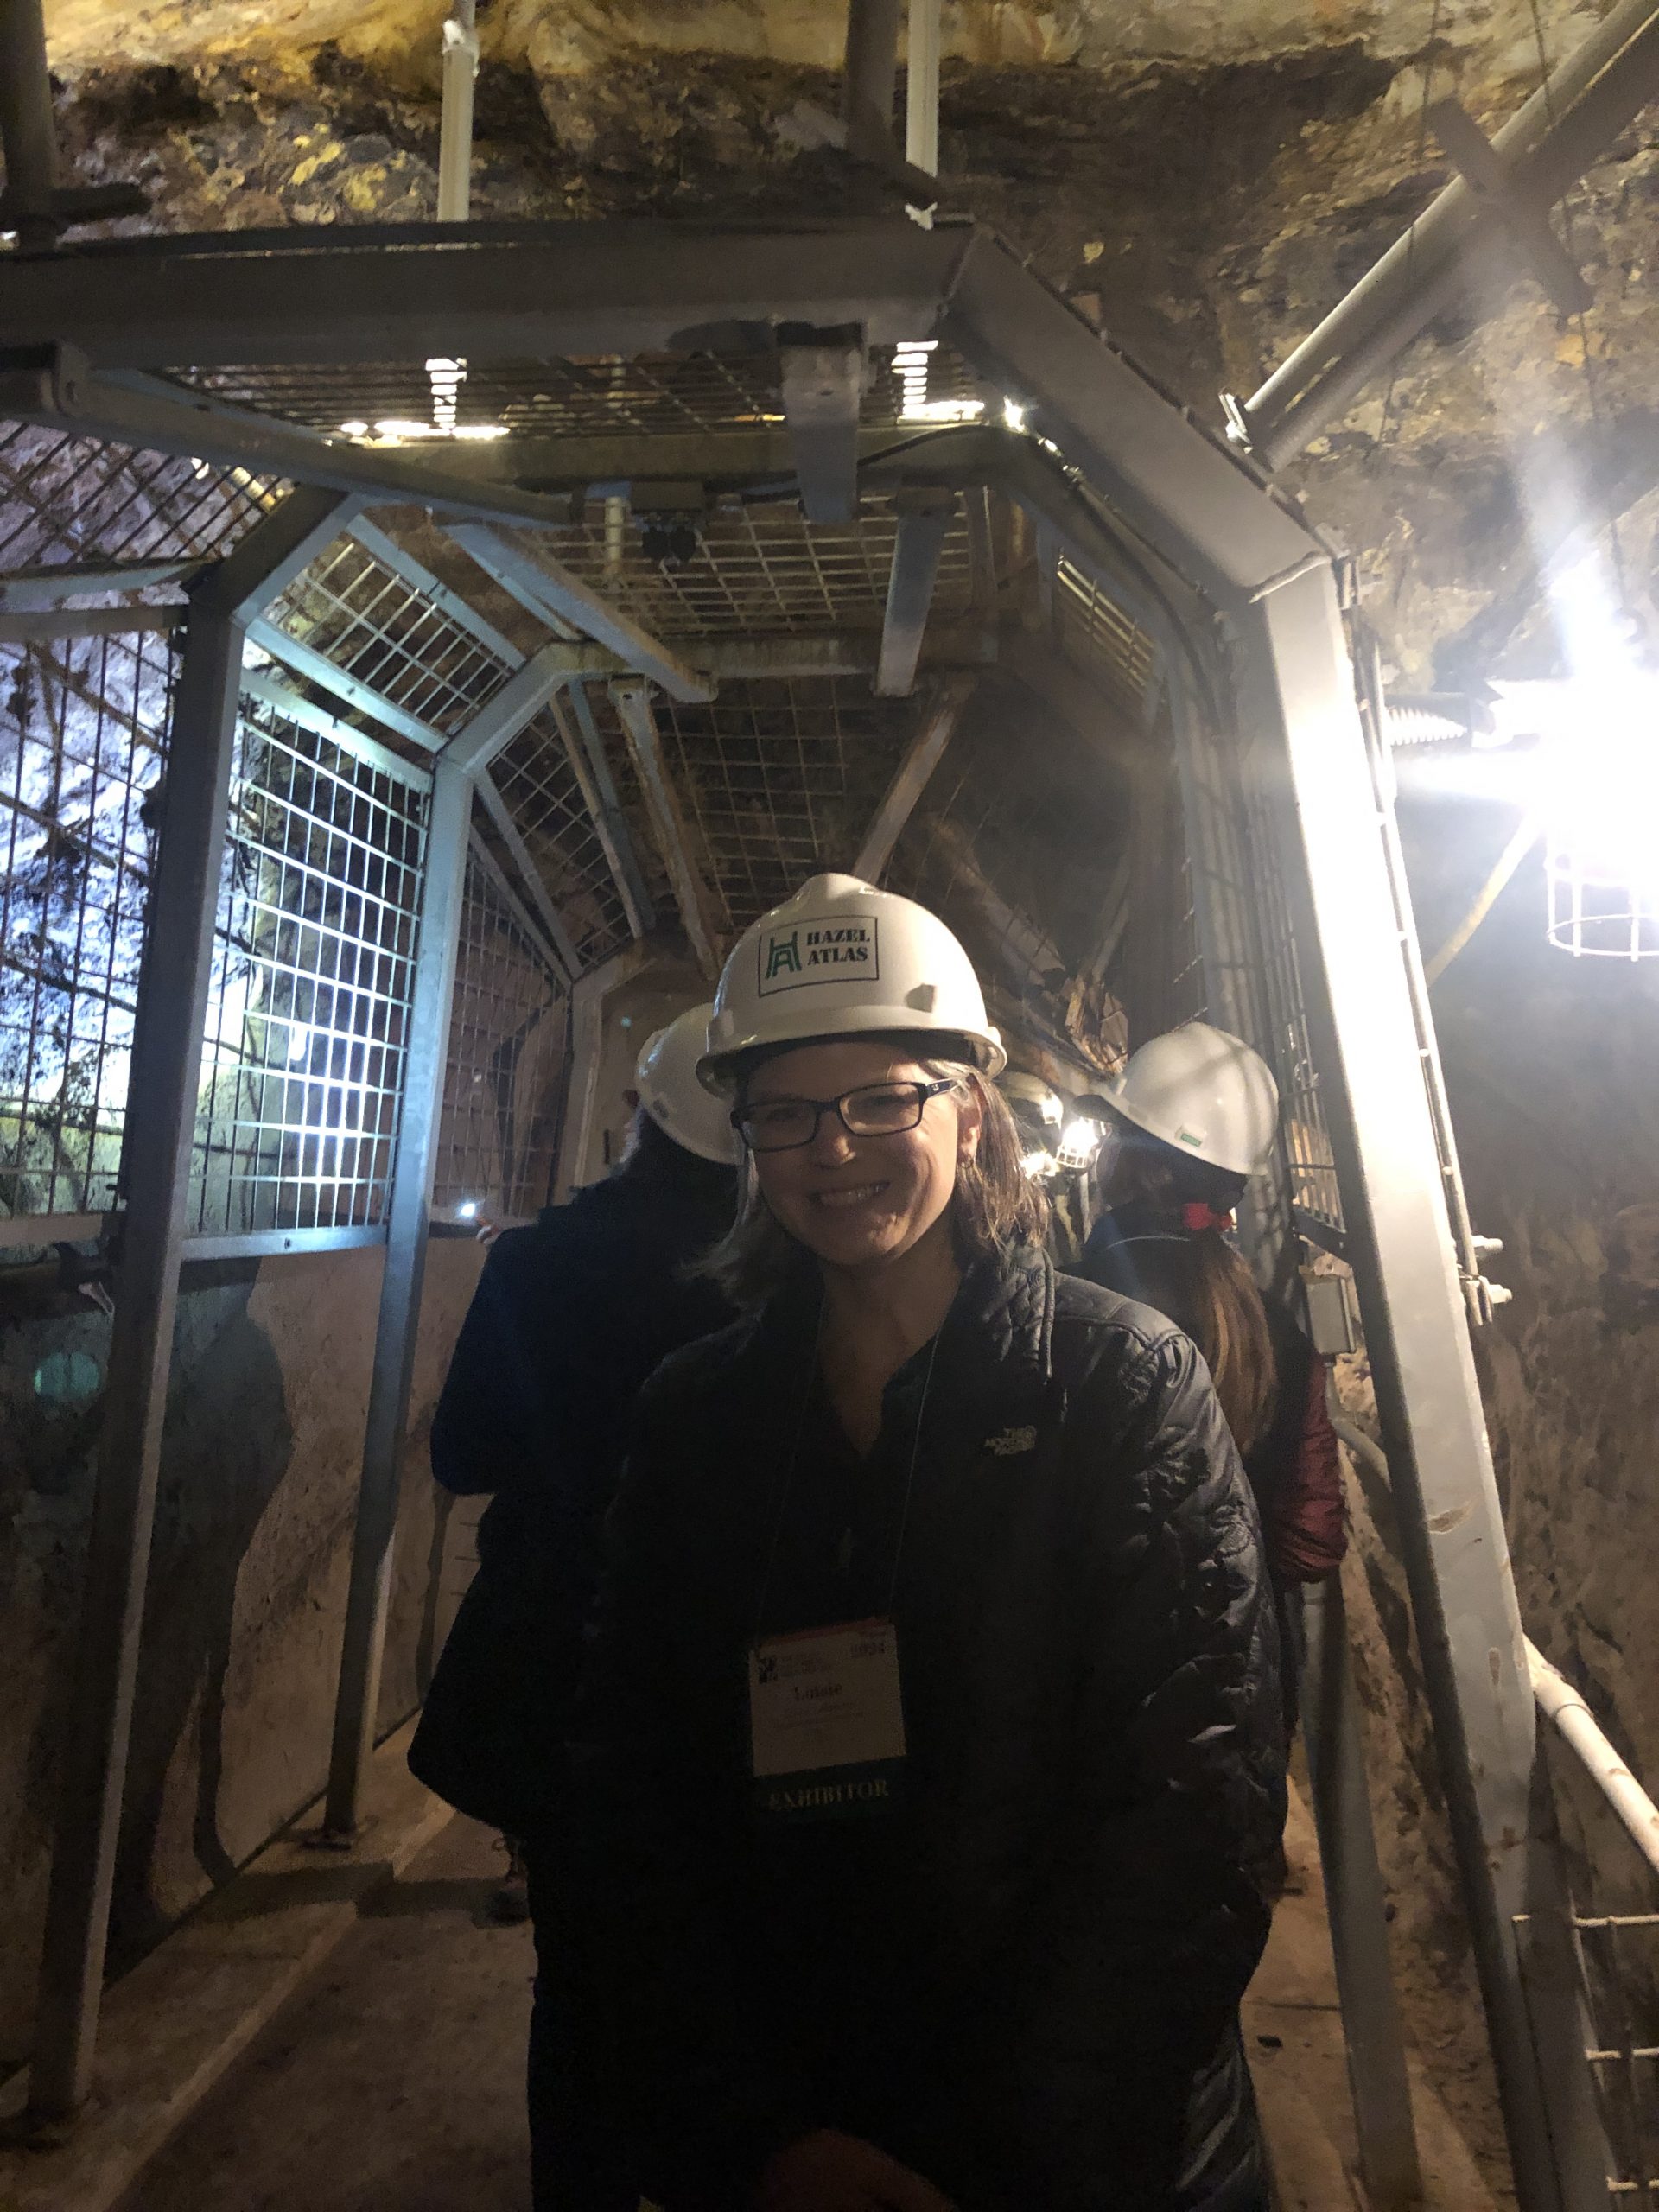 photo of woman wearing a white hardhat and standing inside a tunnel lit by a bright light on the right-hand side of the photo